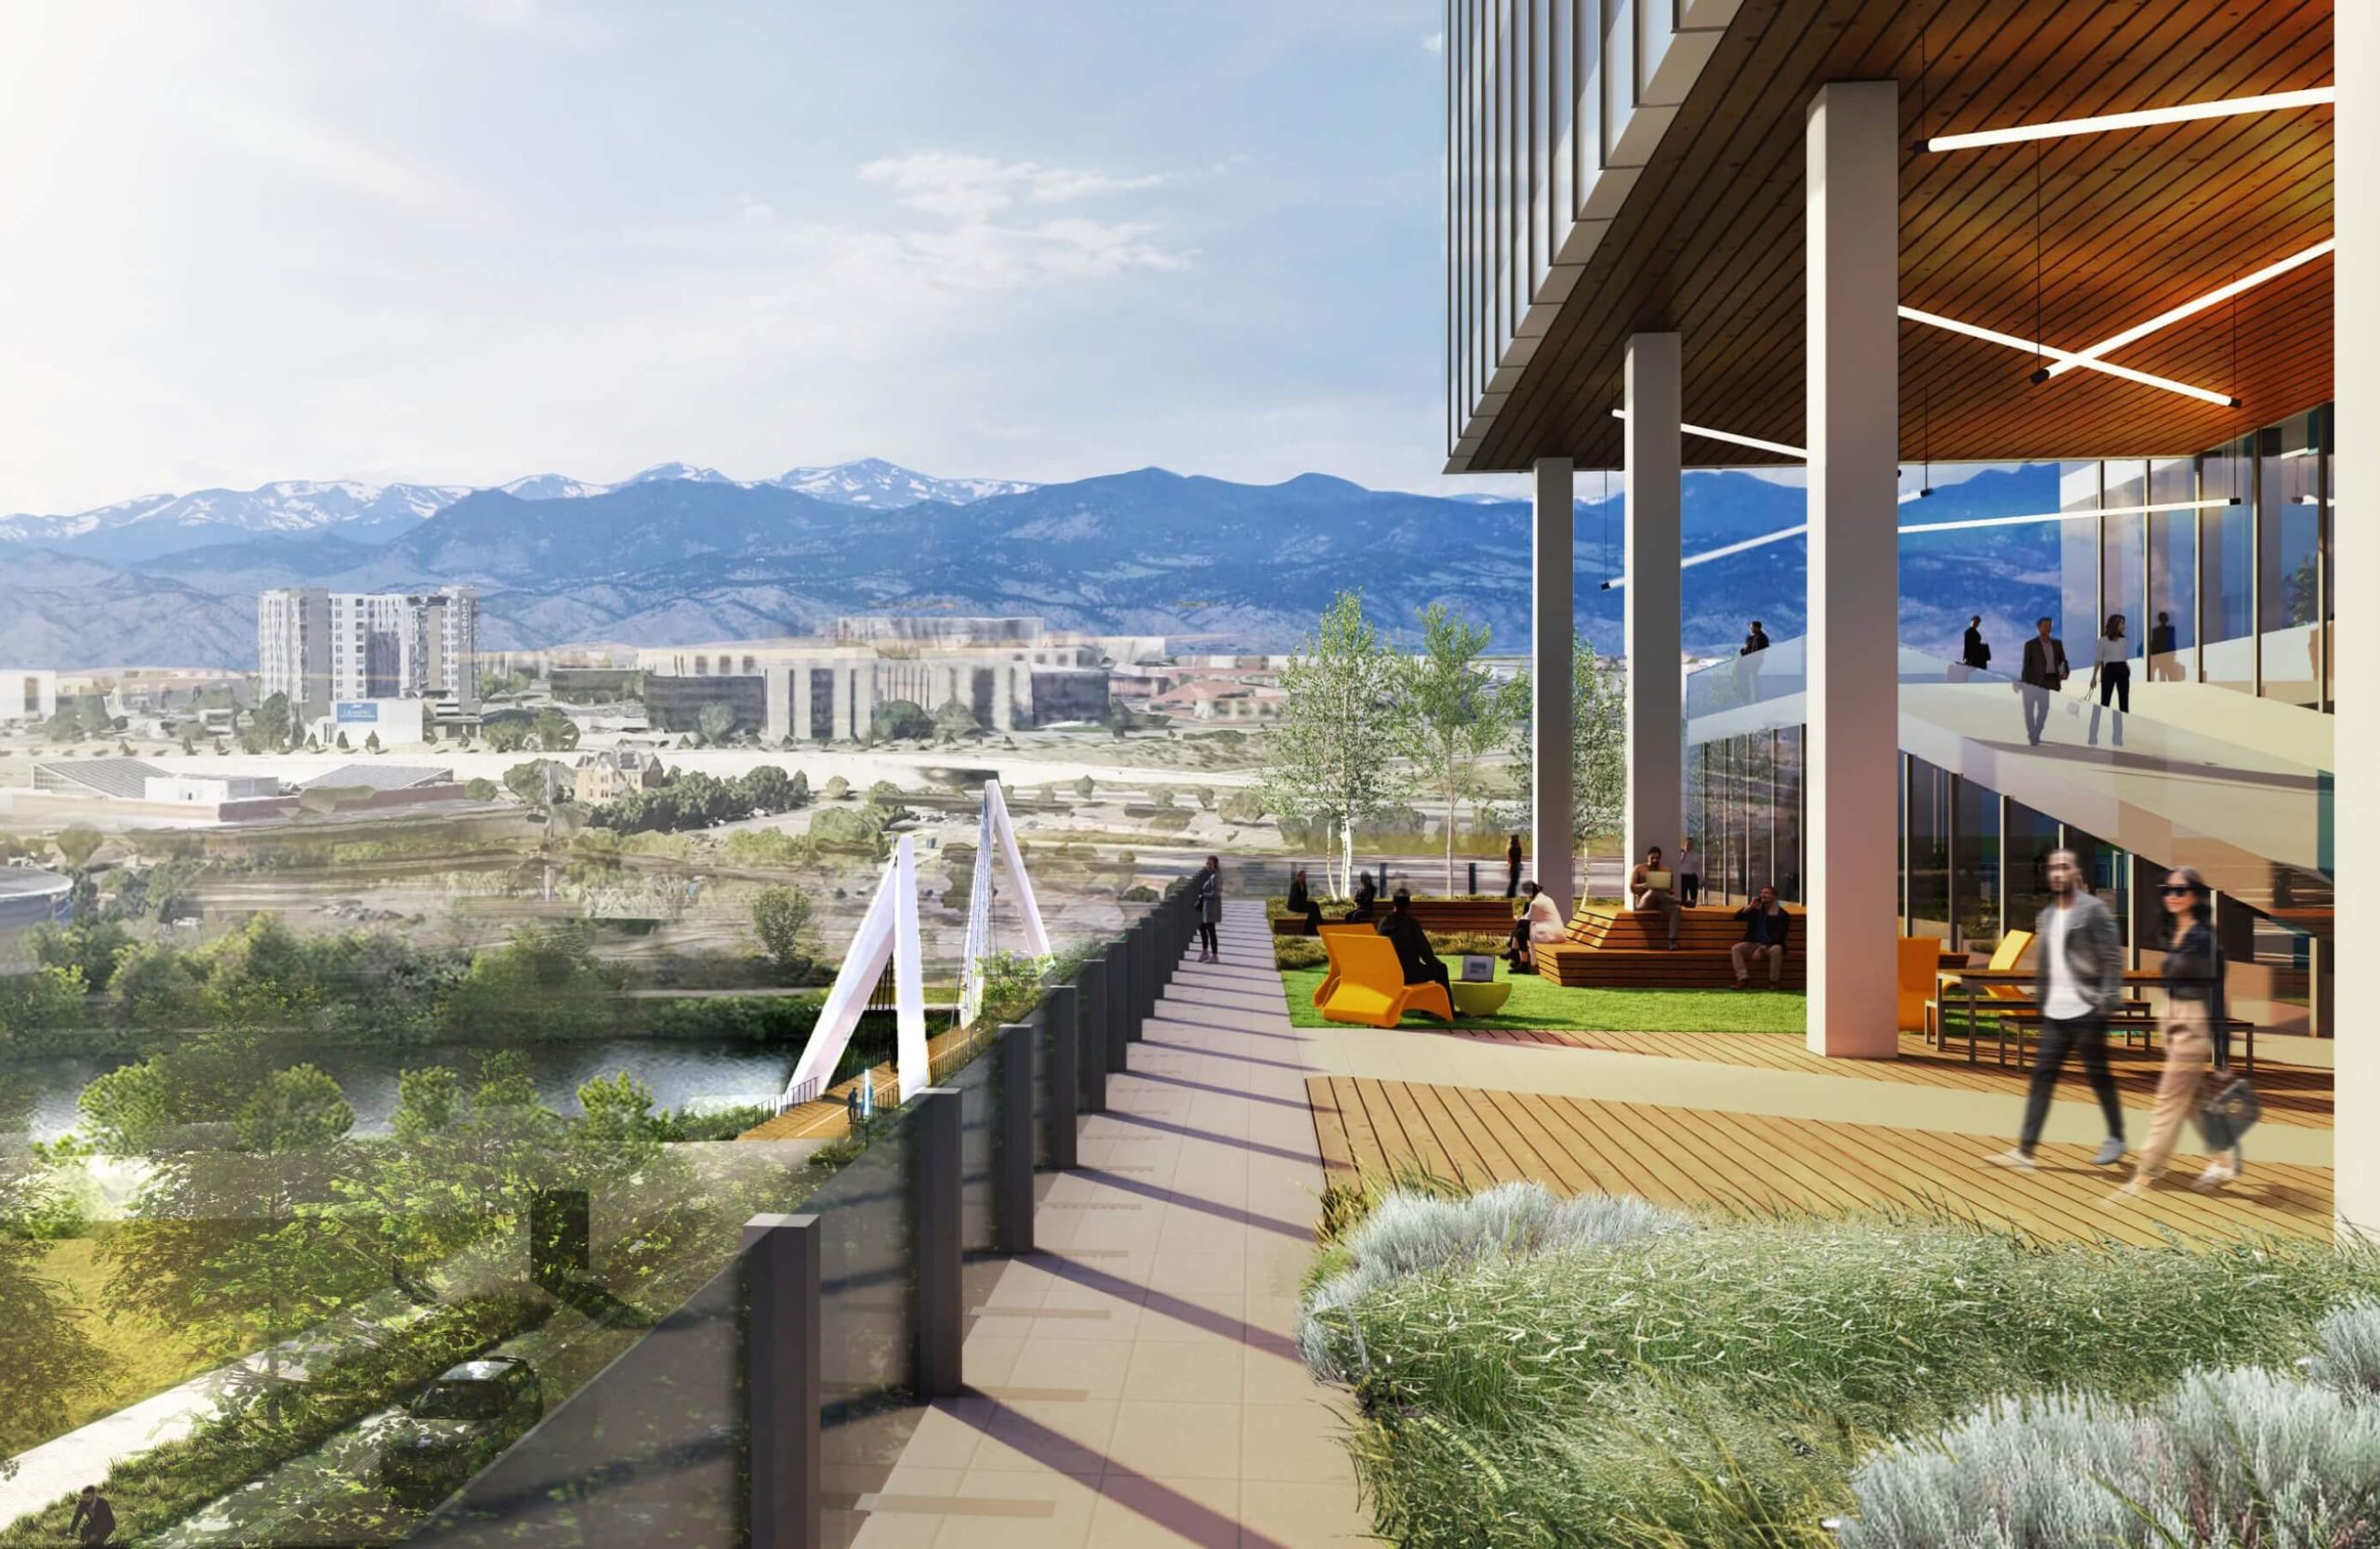 An artist's rendering of a building with a view of mountains.